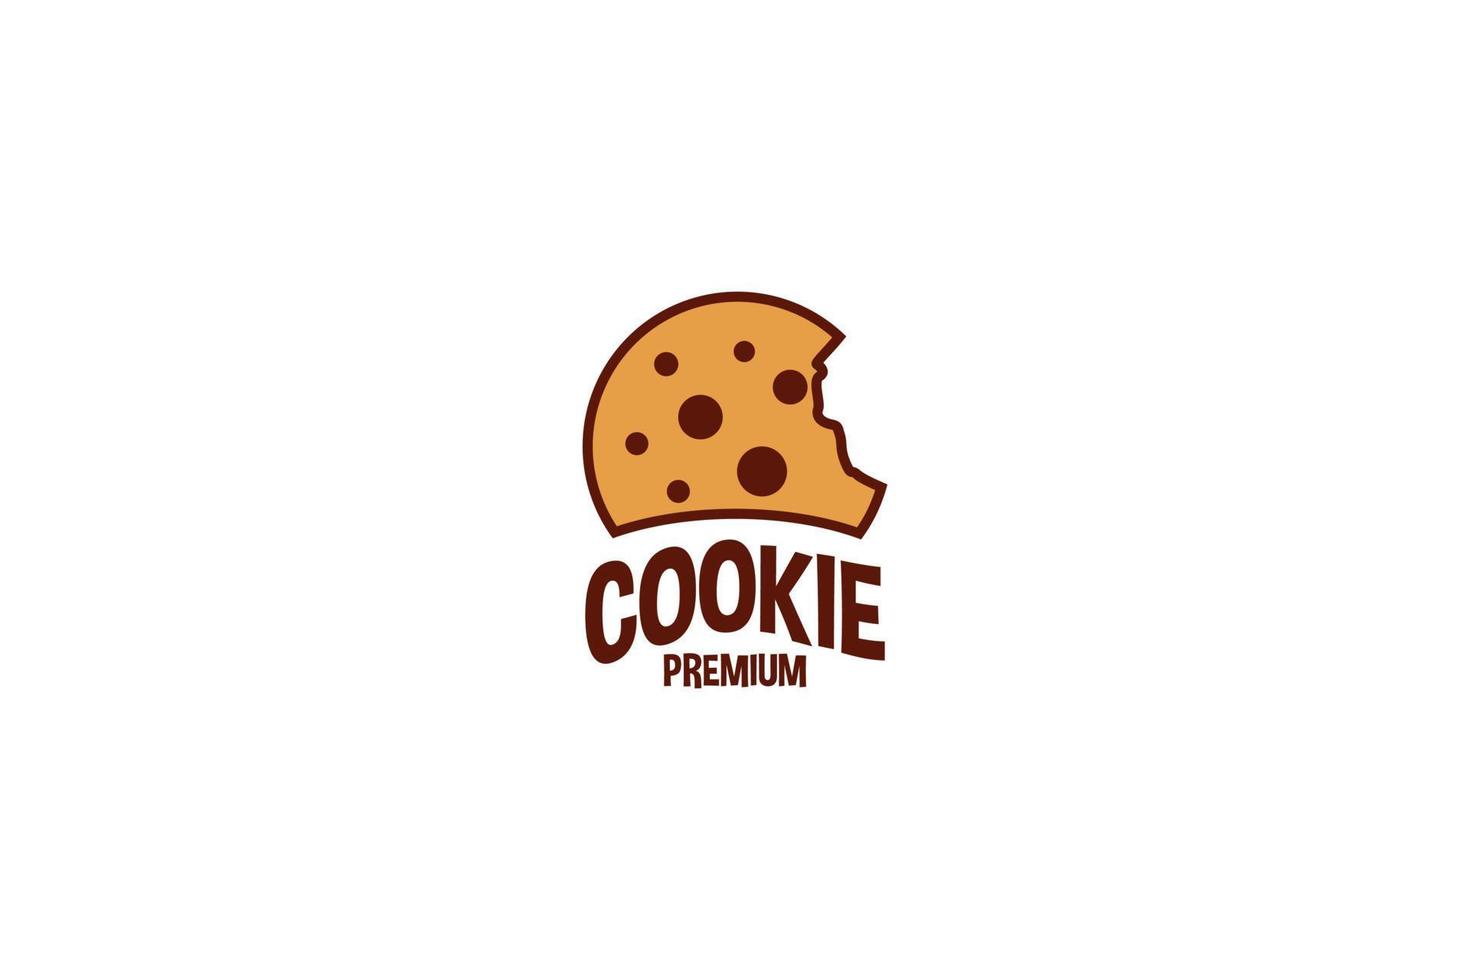 Flat chocolate chips cookie icon logo design vector template